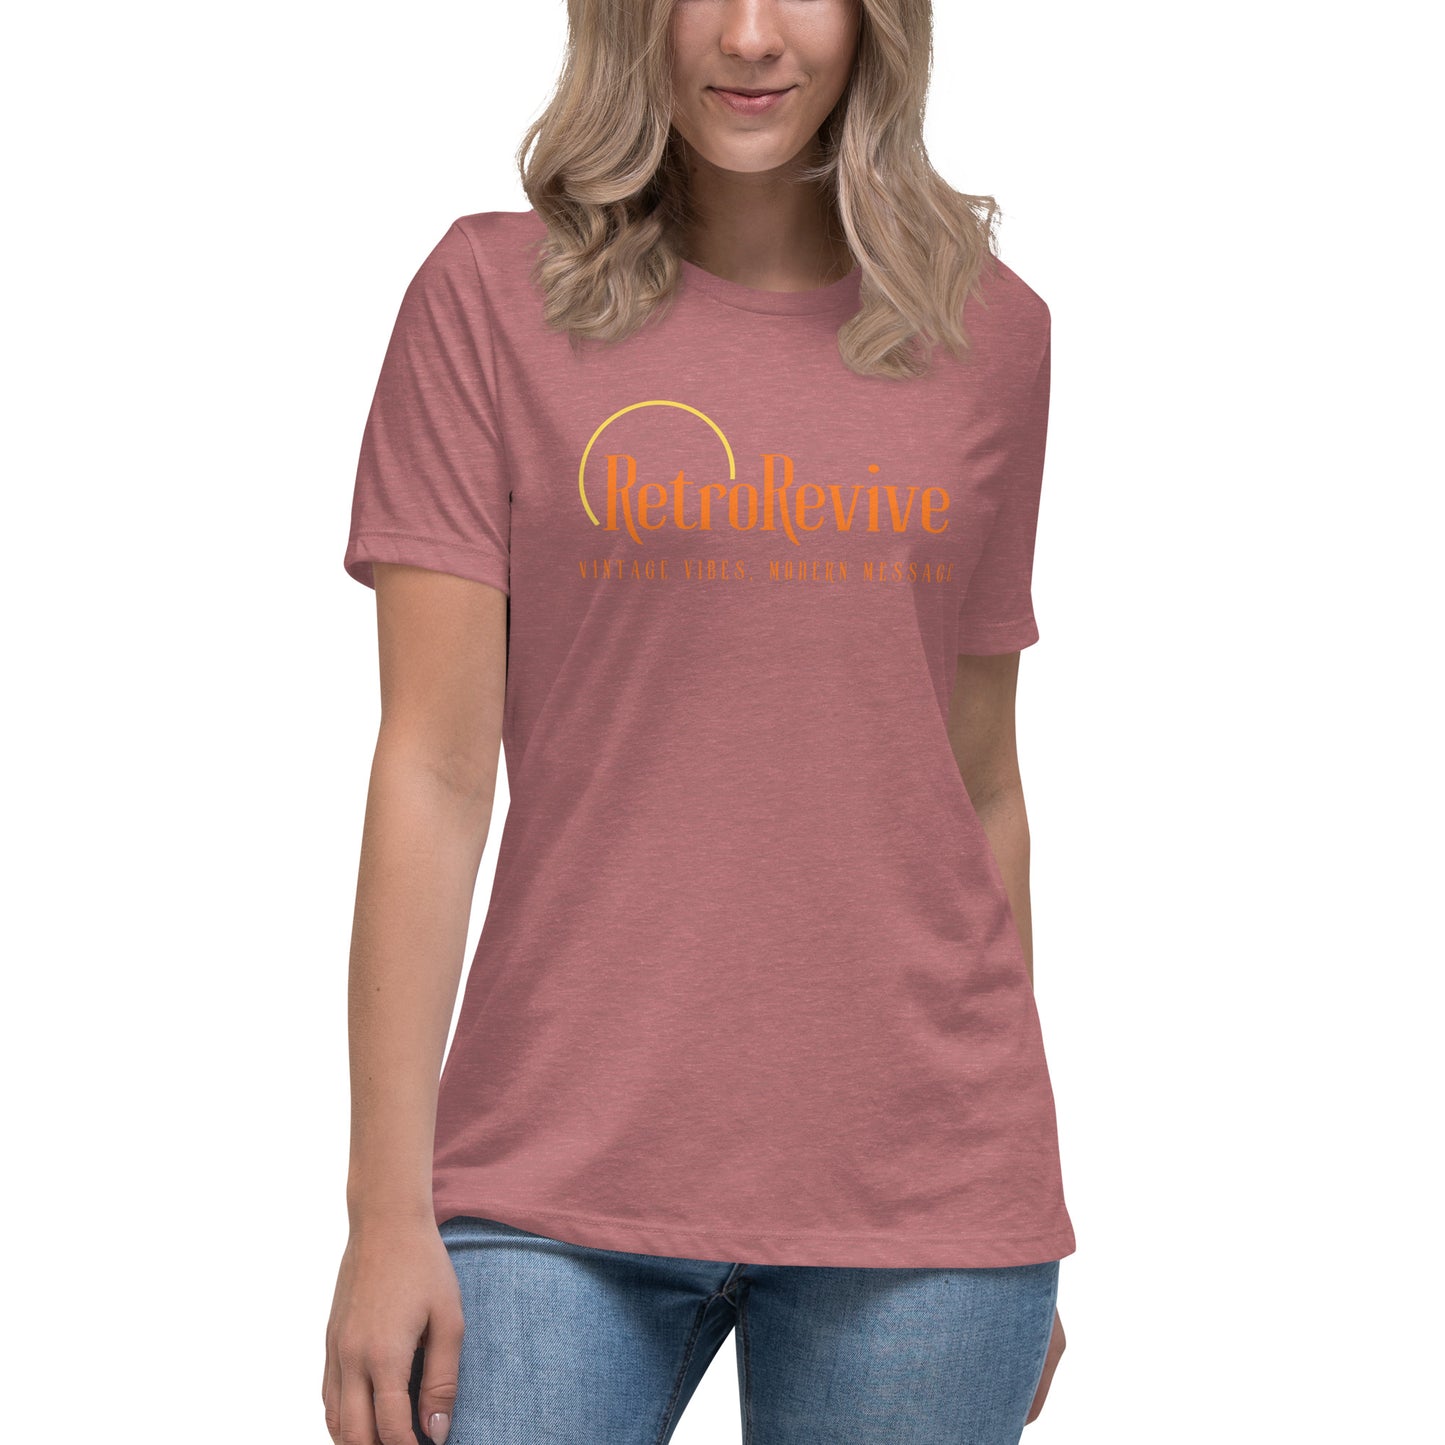 RetroRevive Vintage Vibes, Modern Message Women's Relaxed T-Shirt